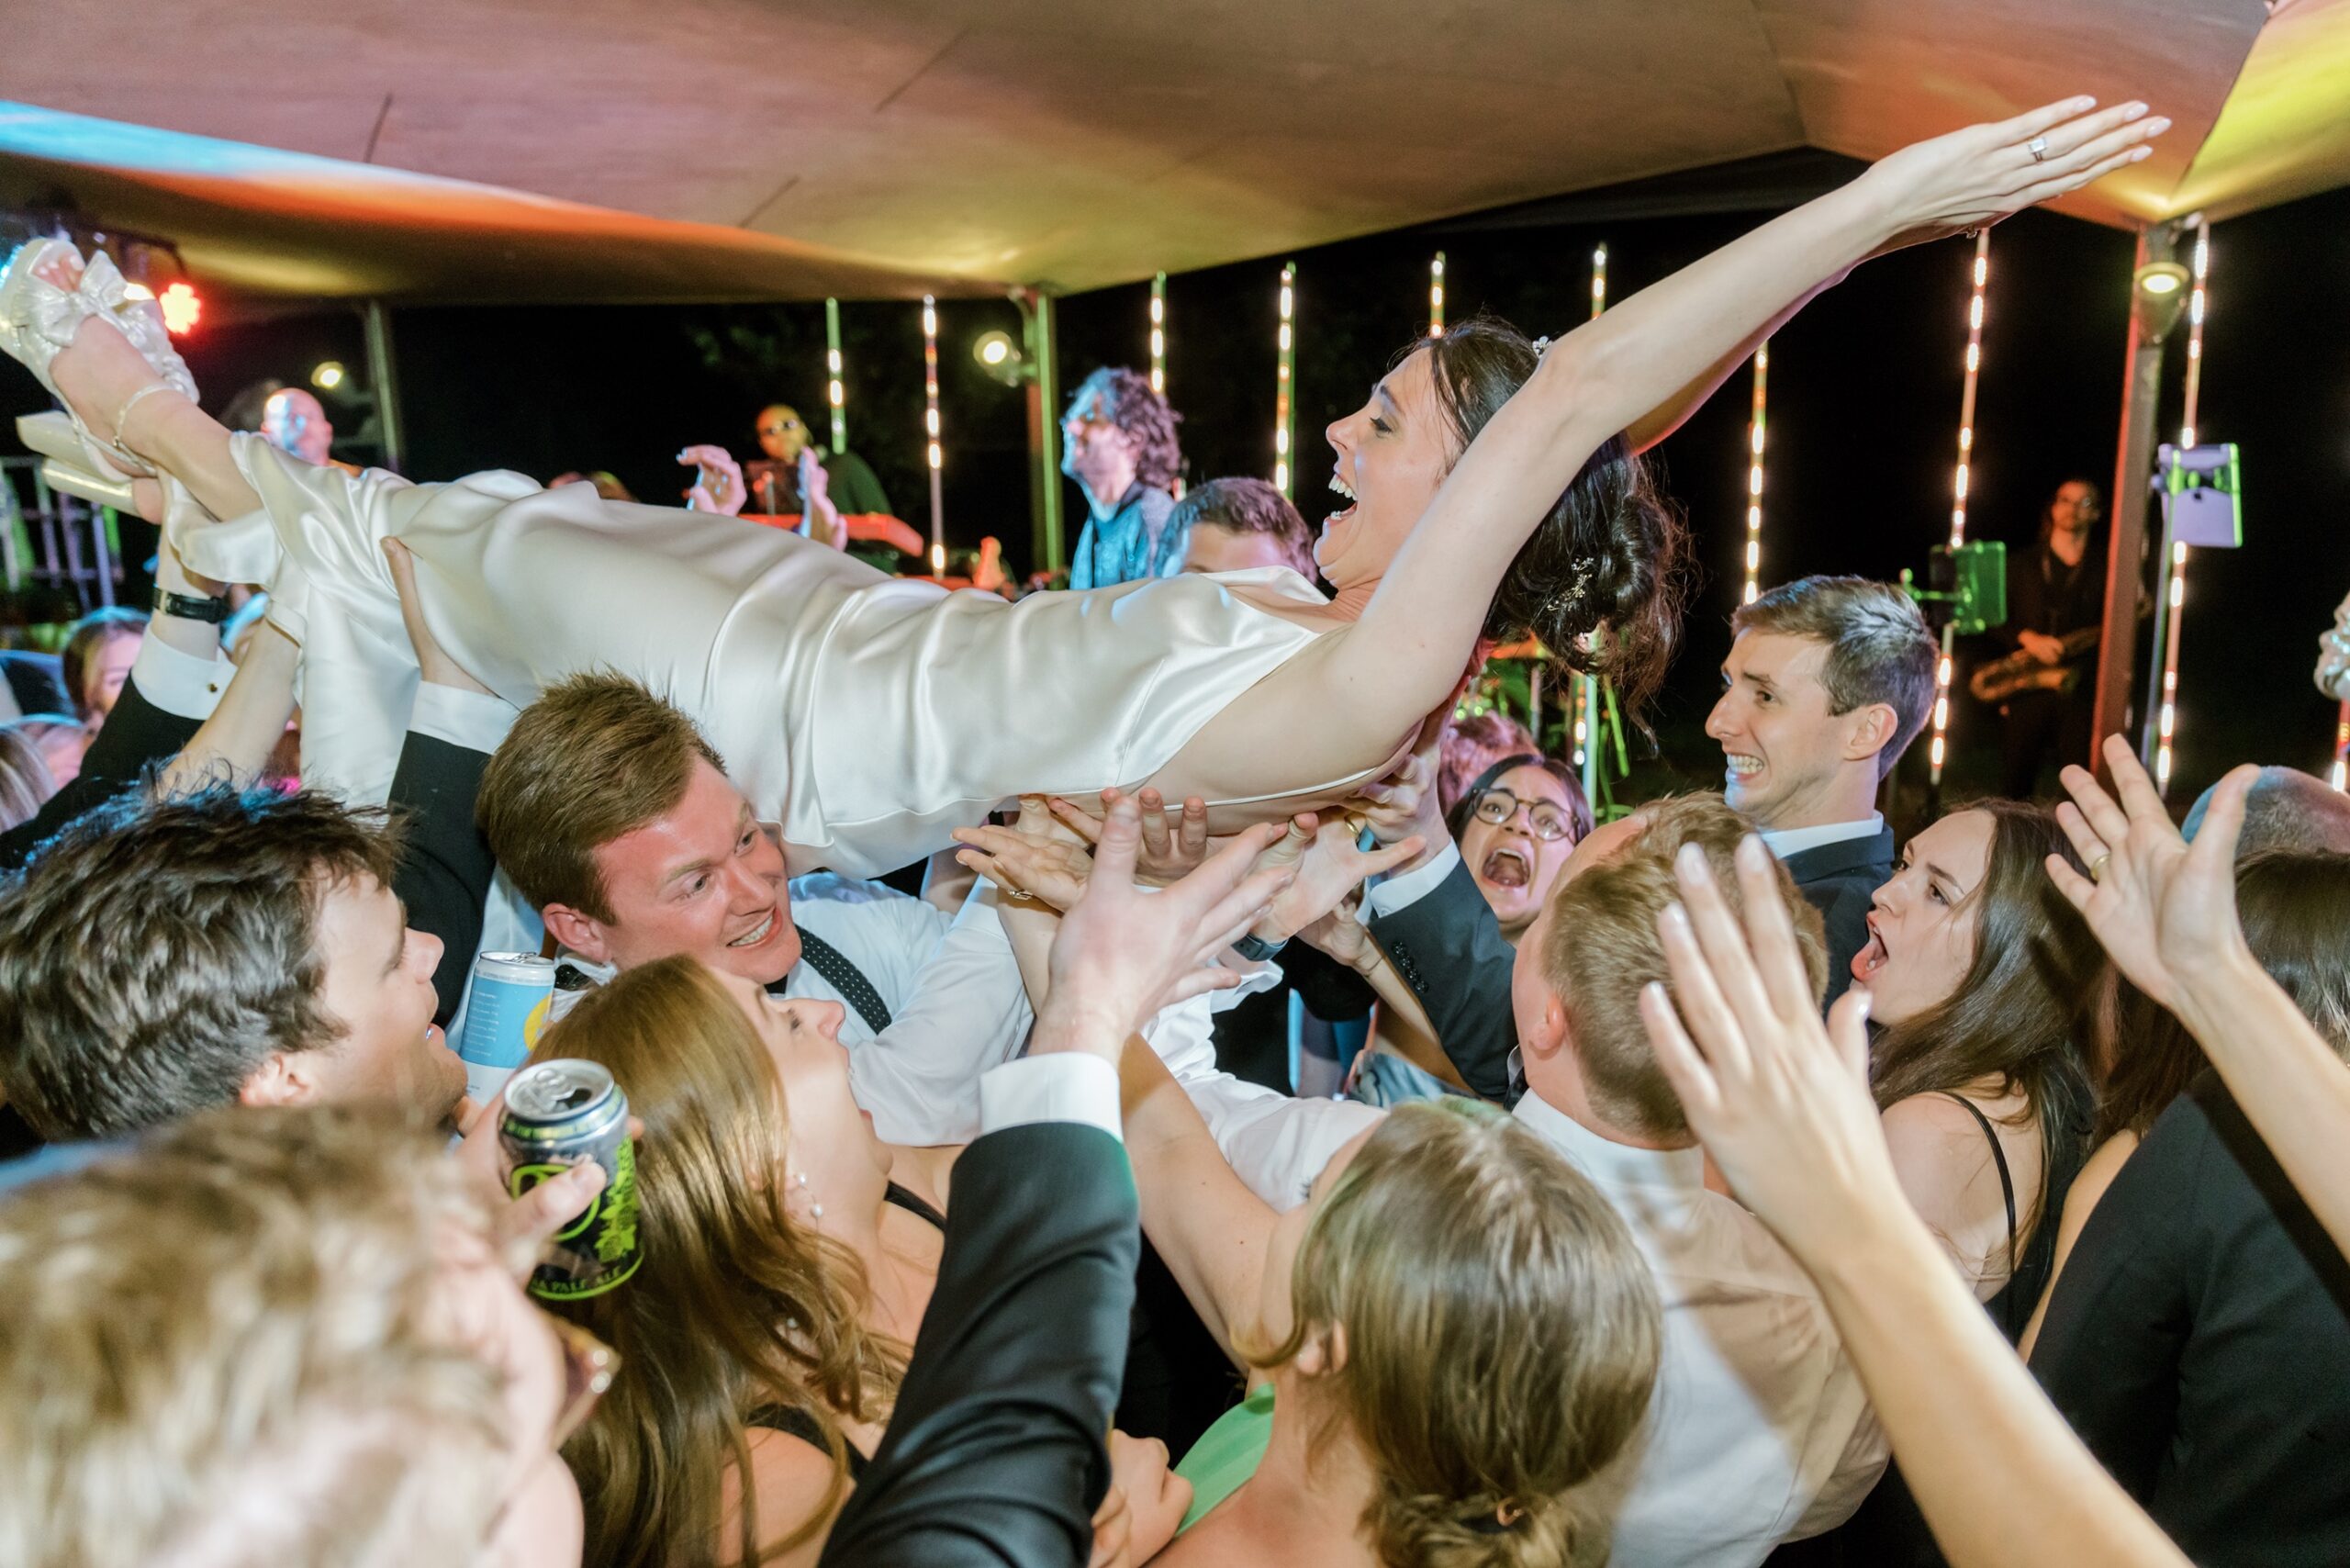 Bride lifted into the air at the Yew Dell Gardens wedding reception